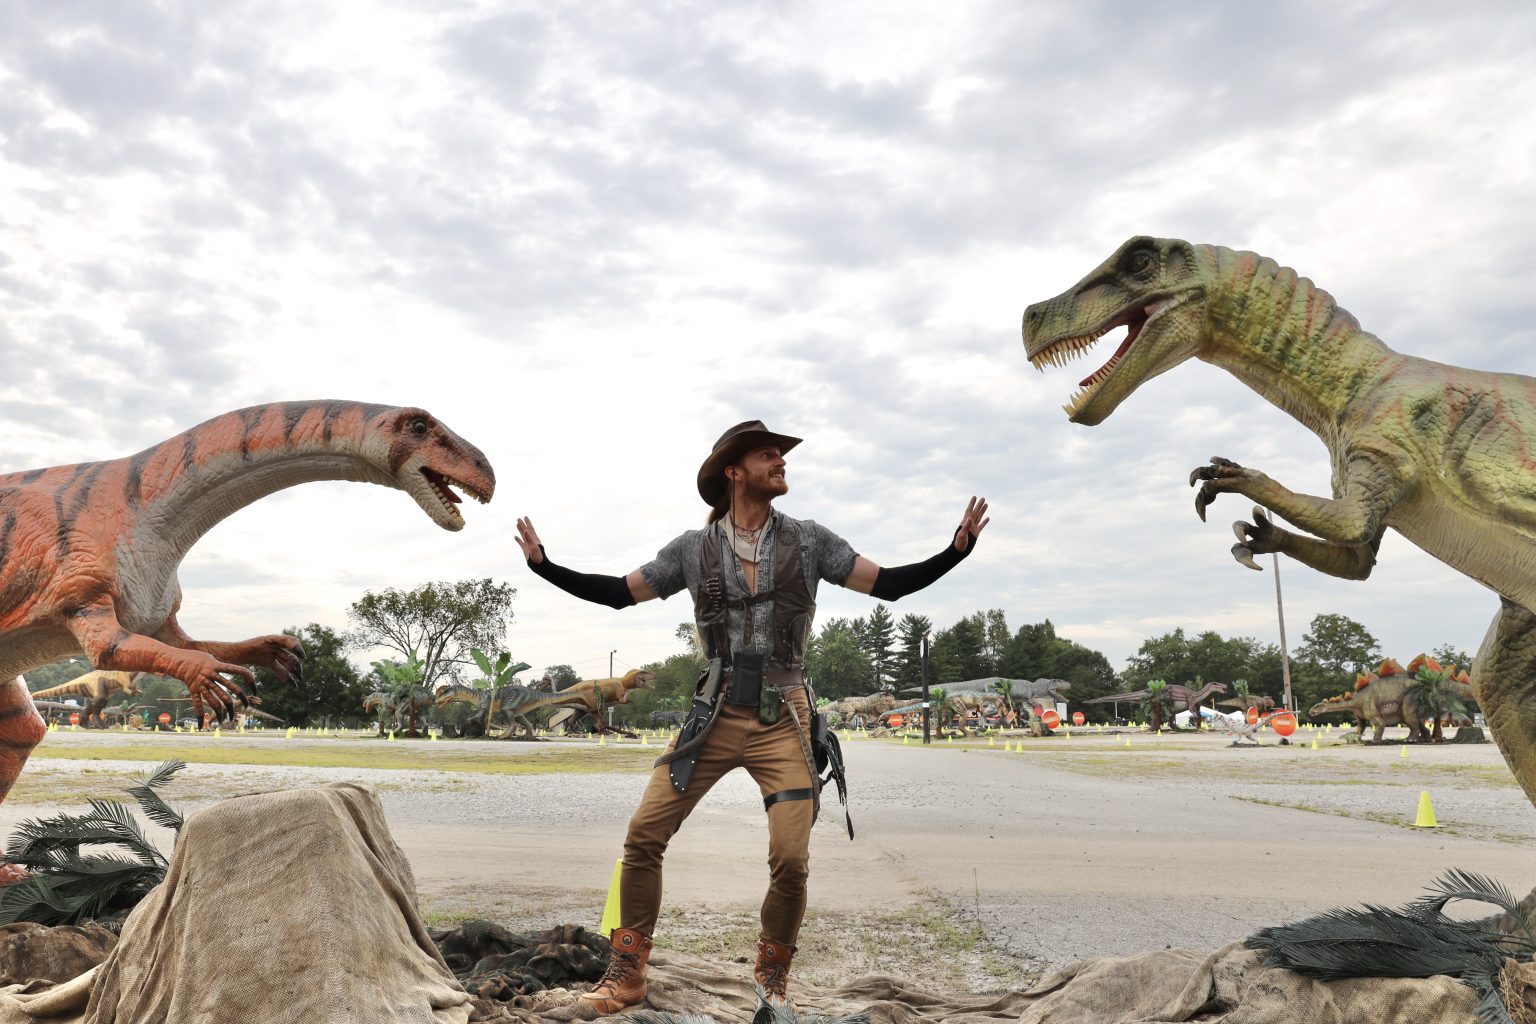 Jurassic Quest Tour Lifesized Dinosaurs Storm Across the US Free